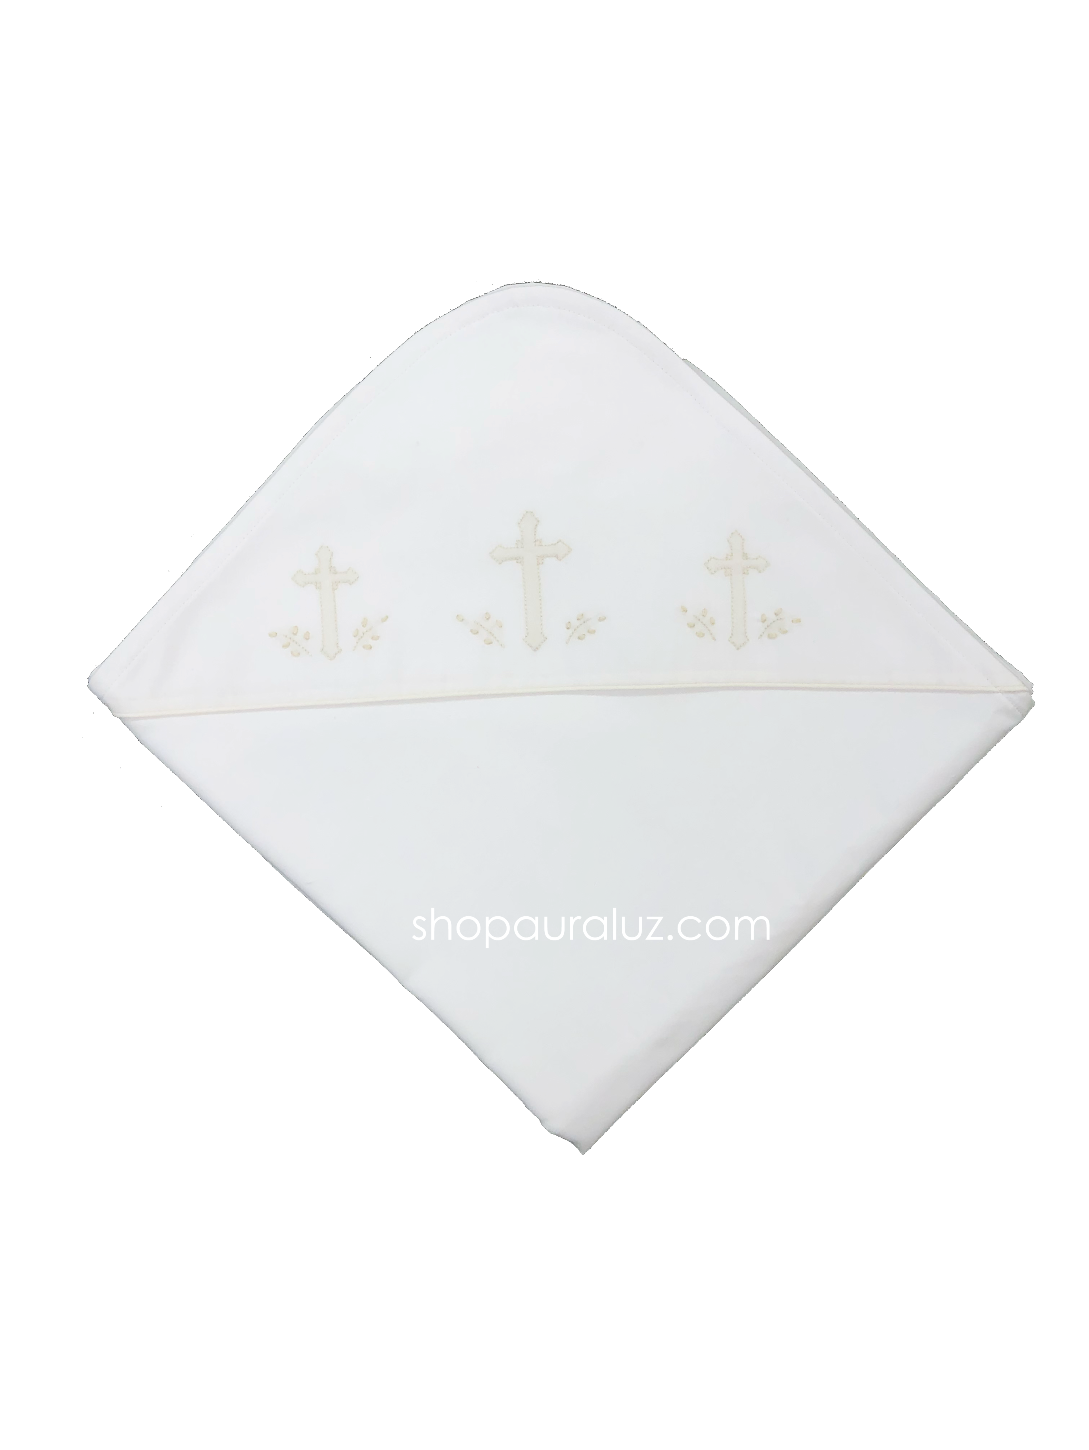 Auraluz Blanket...White with ecru binding trim and embroidered crosses